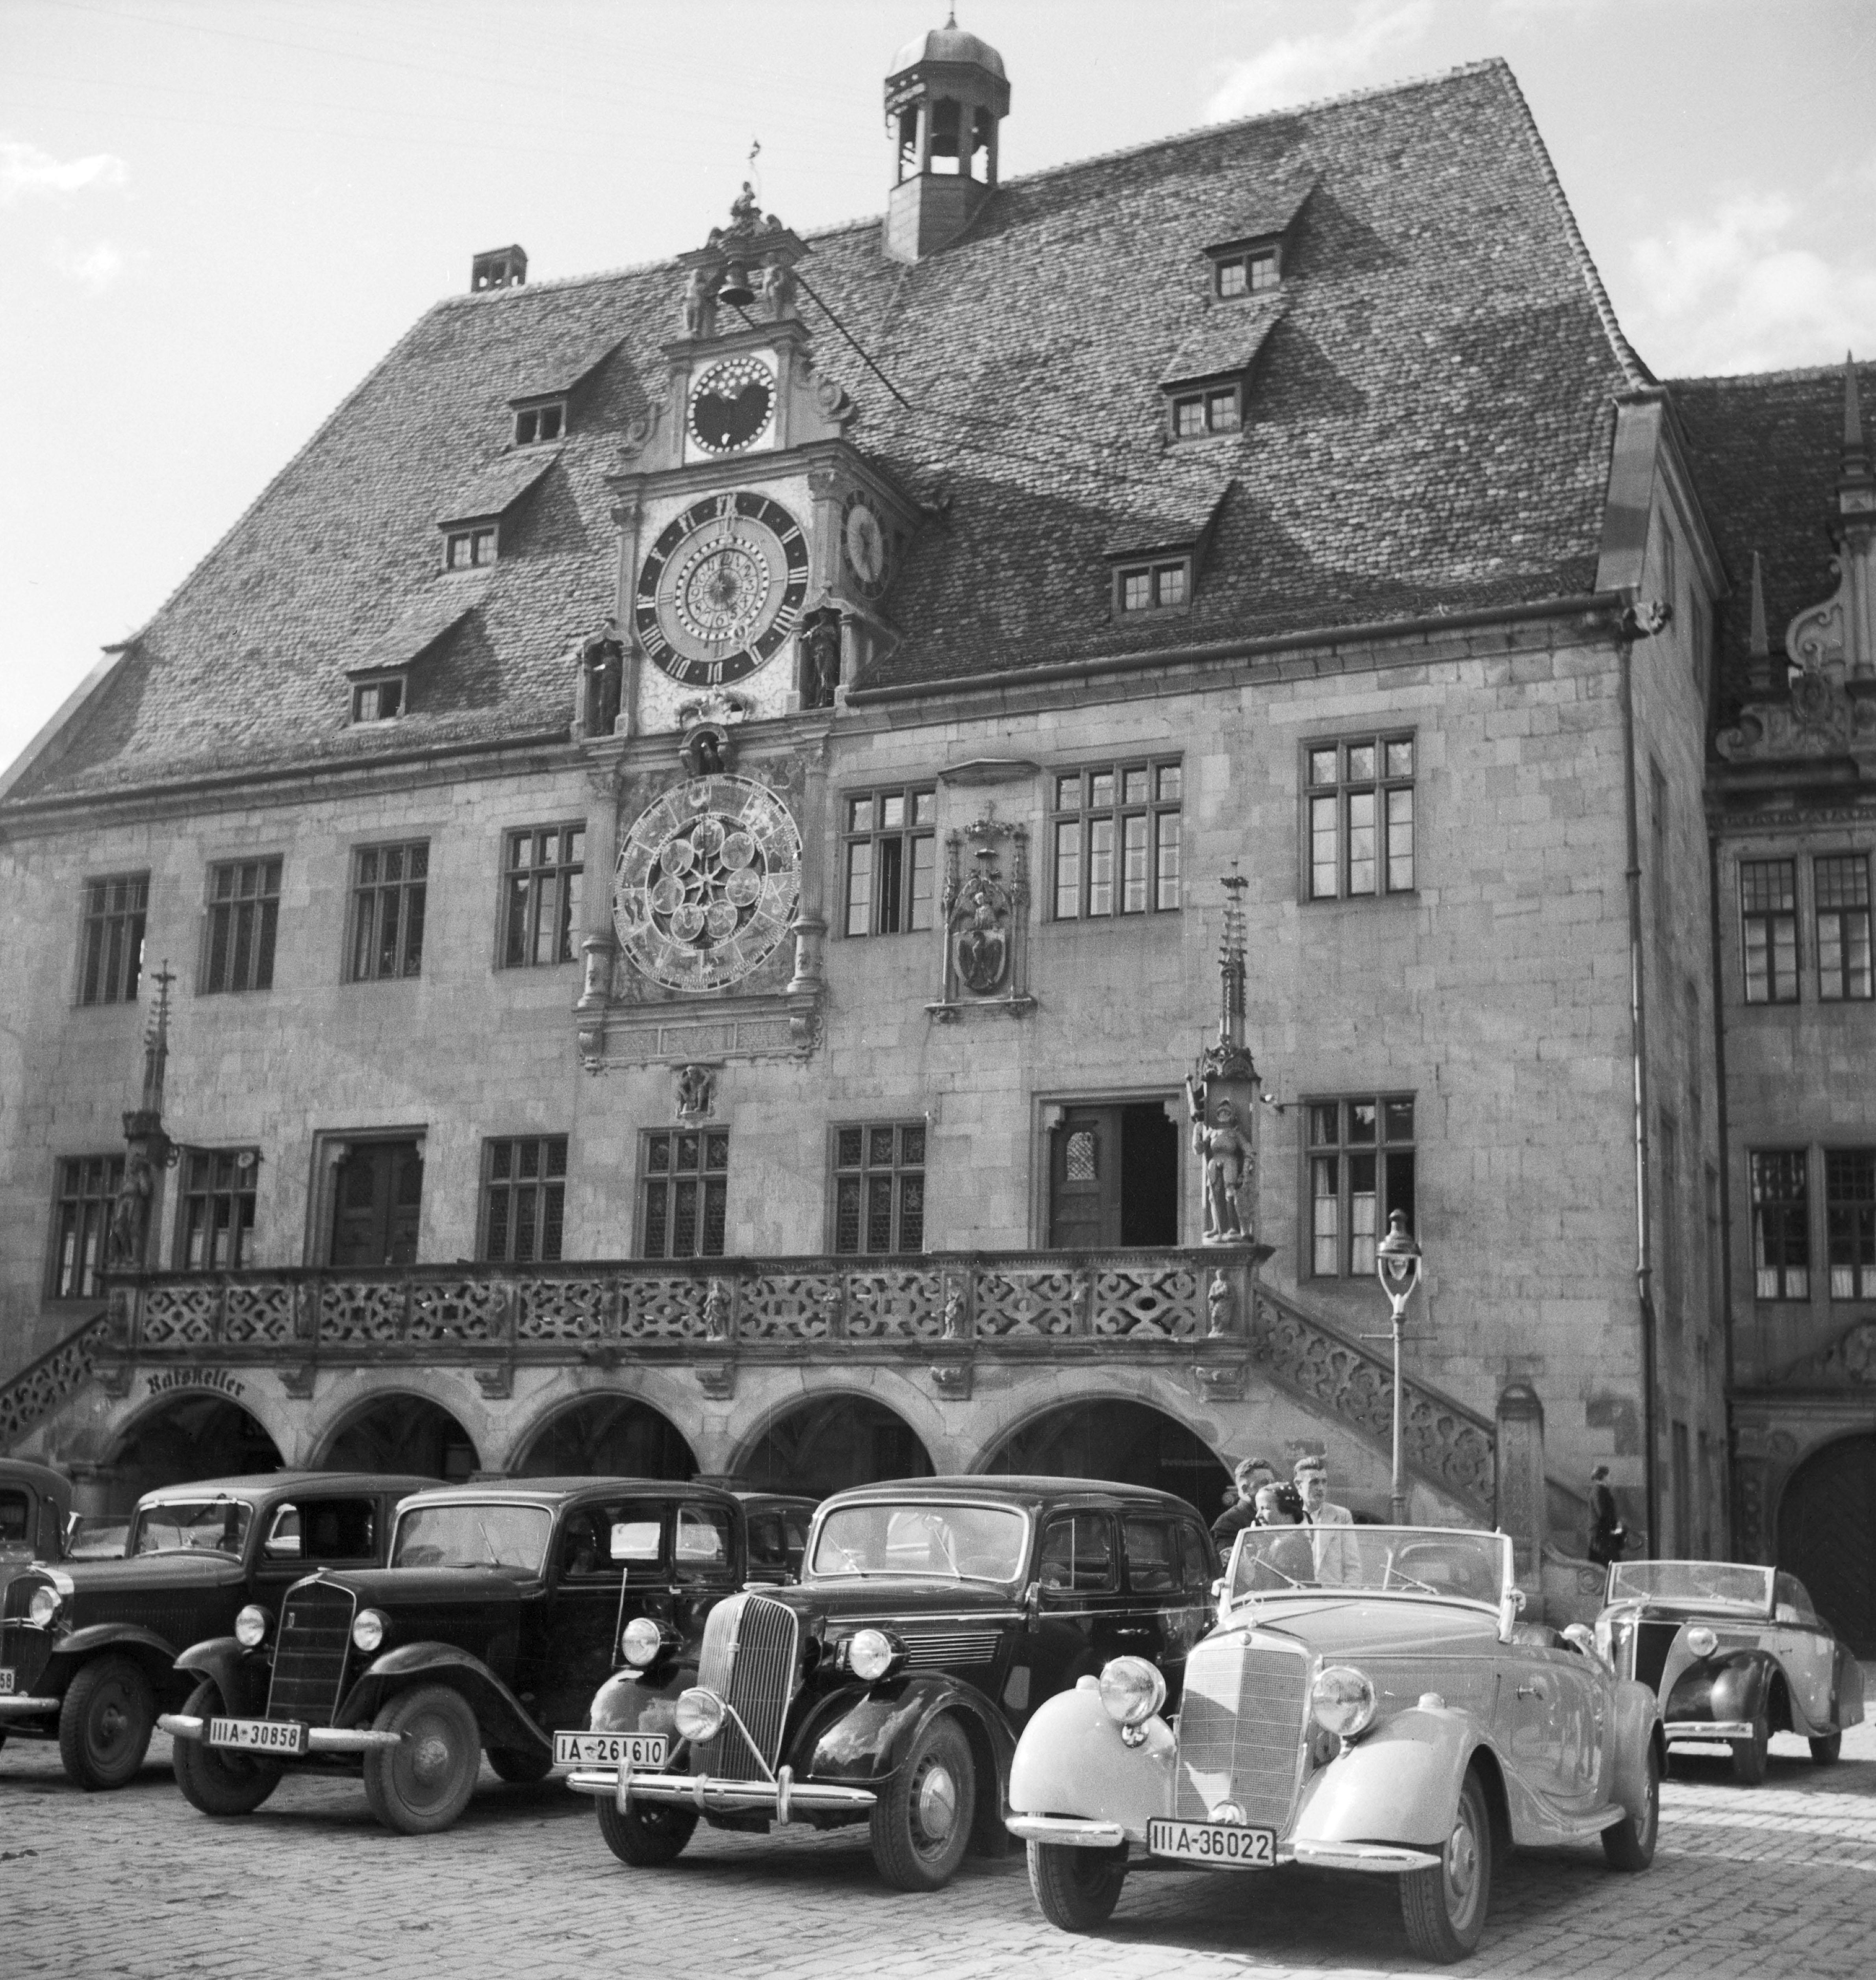 Karl Heinrich Lämmel Black and White Photograph - Cars parking at old Heidelberg city hall, Germany 1936, Printed Later 